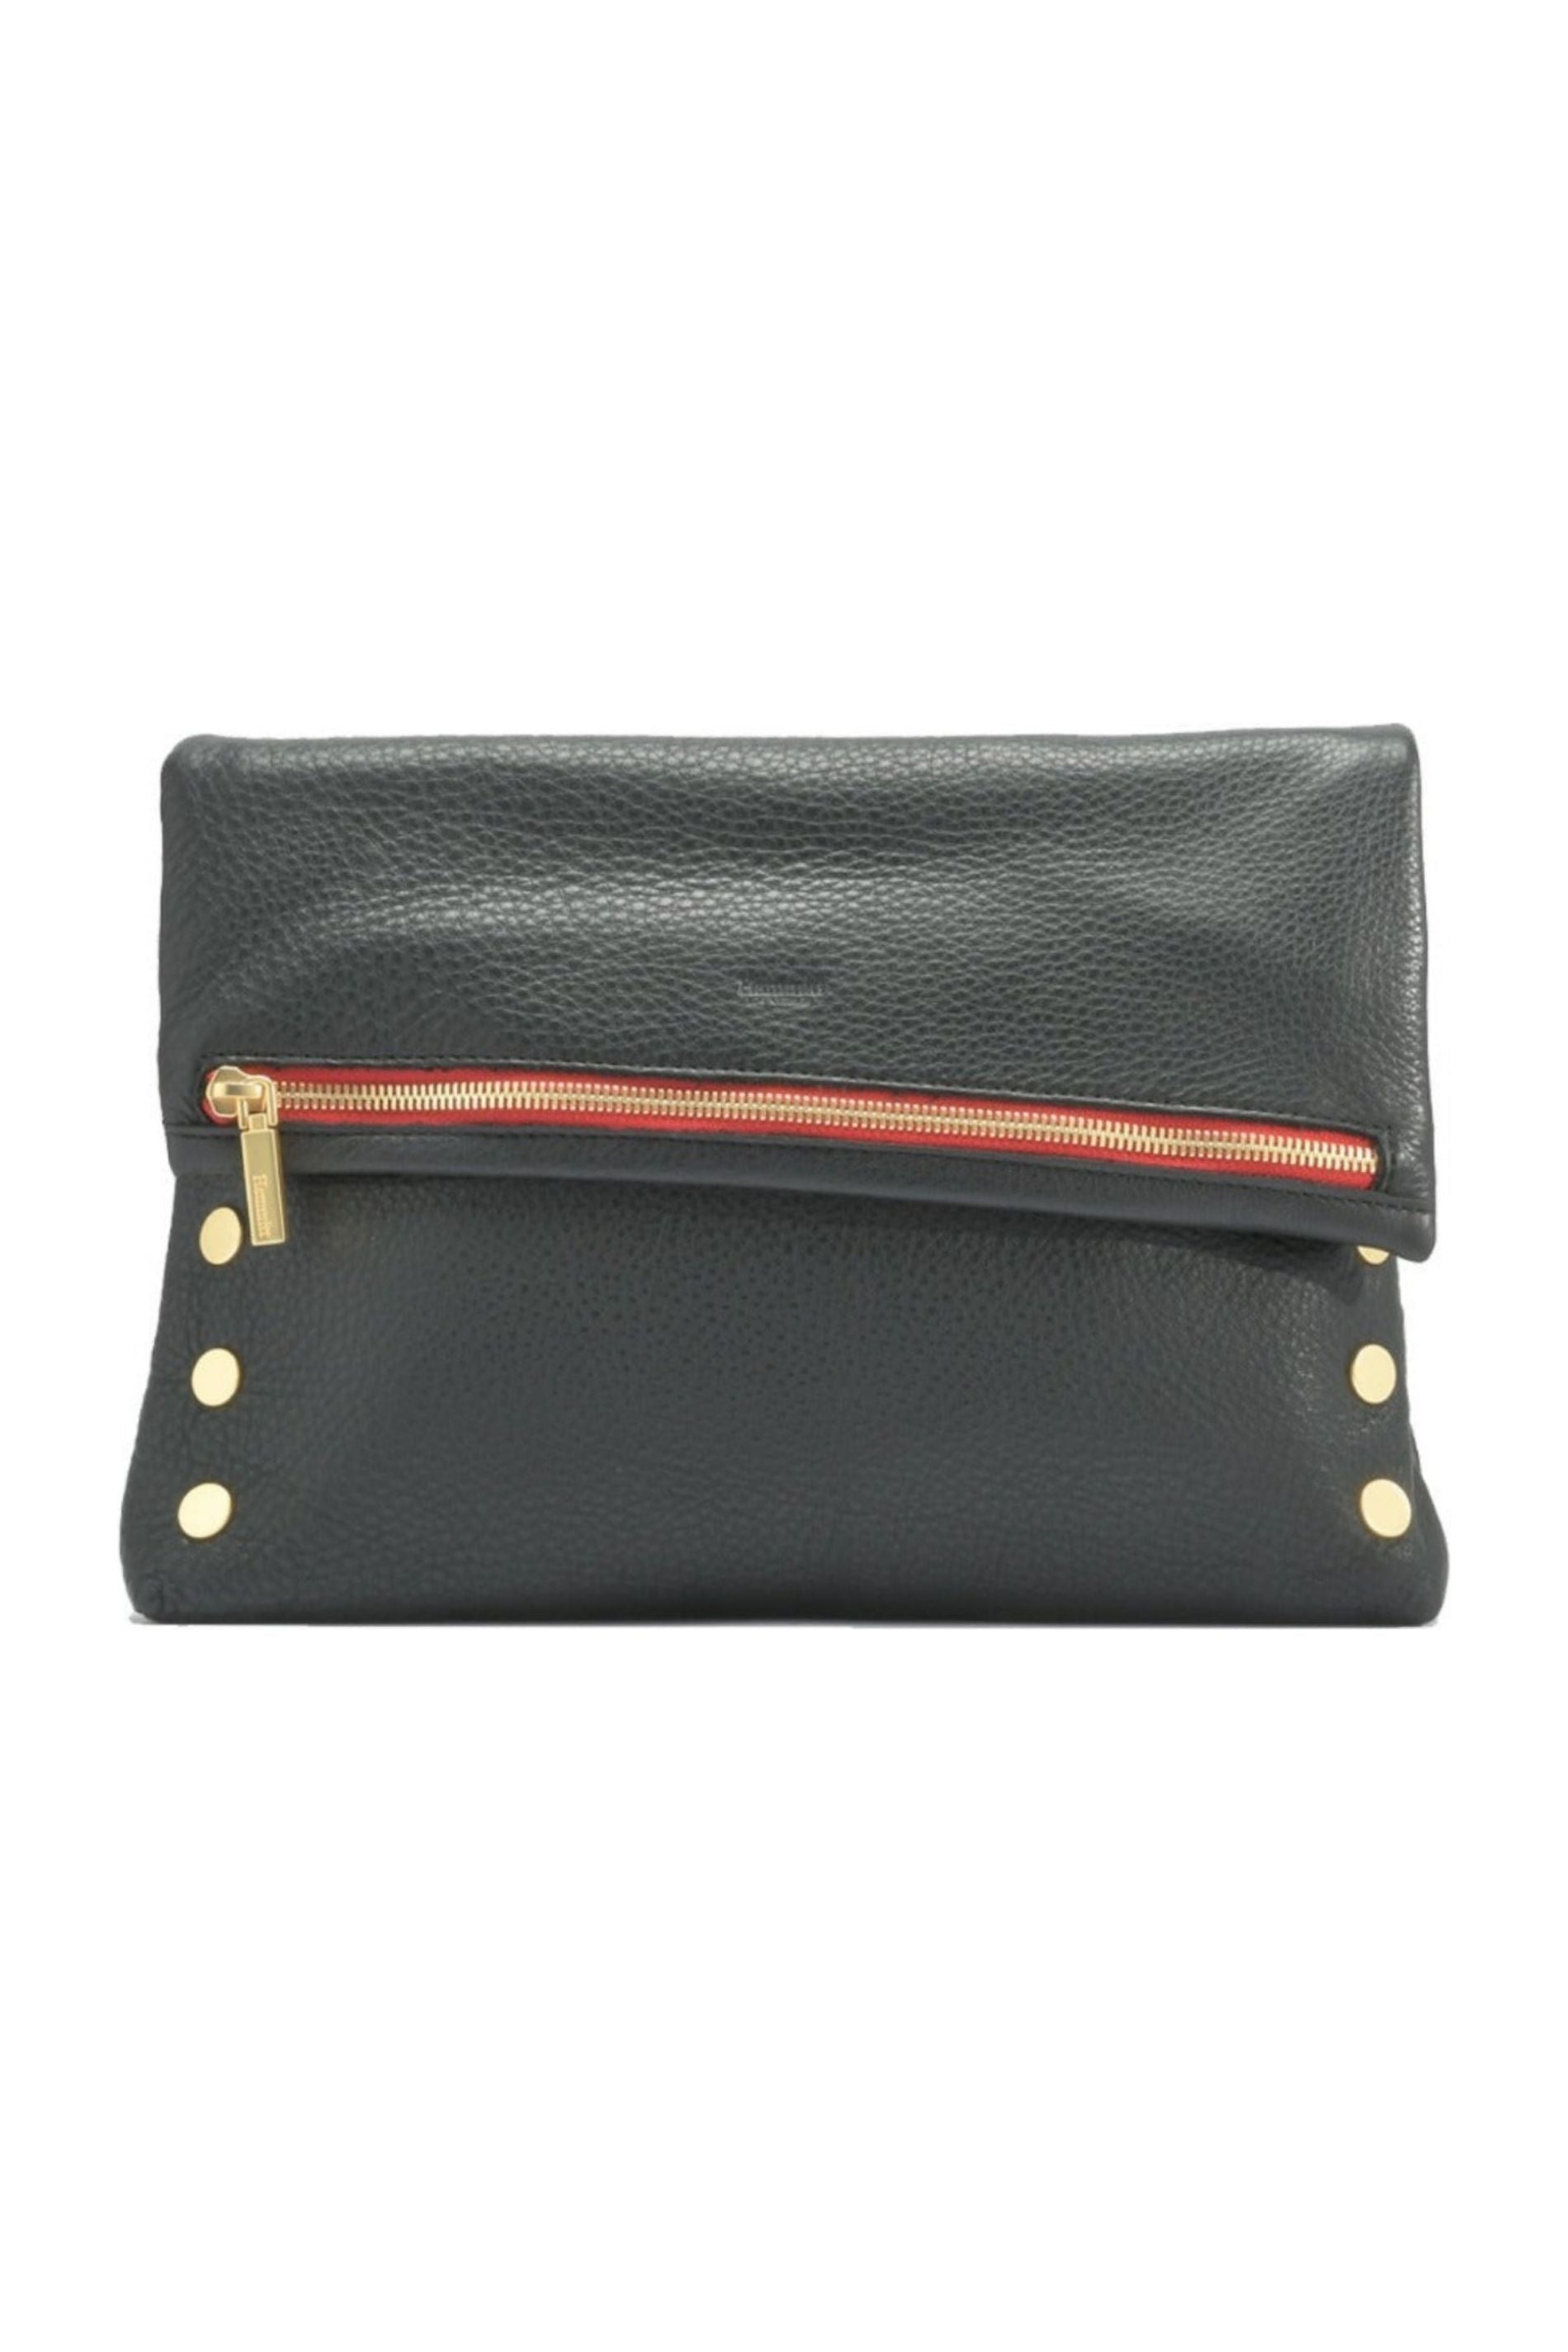 Buy Adamis Black Colour Pure Leather Coin Purse (W321) Online